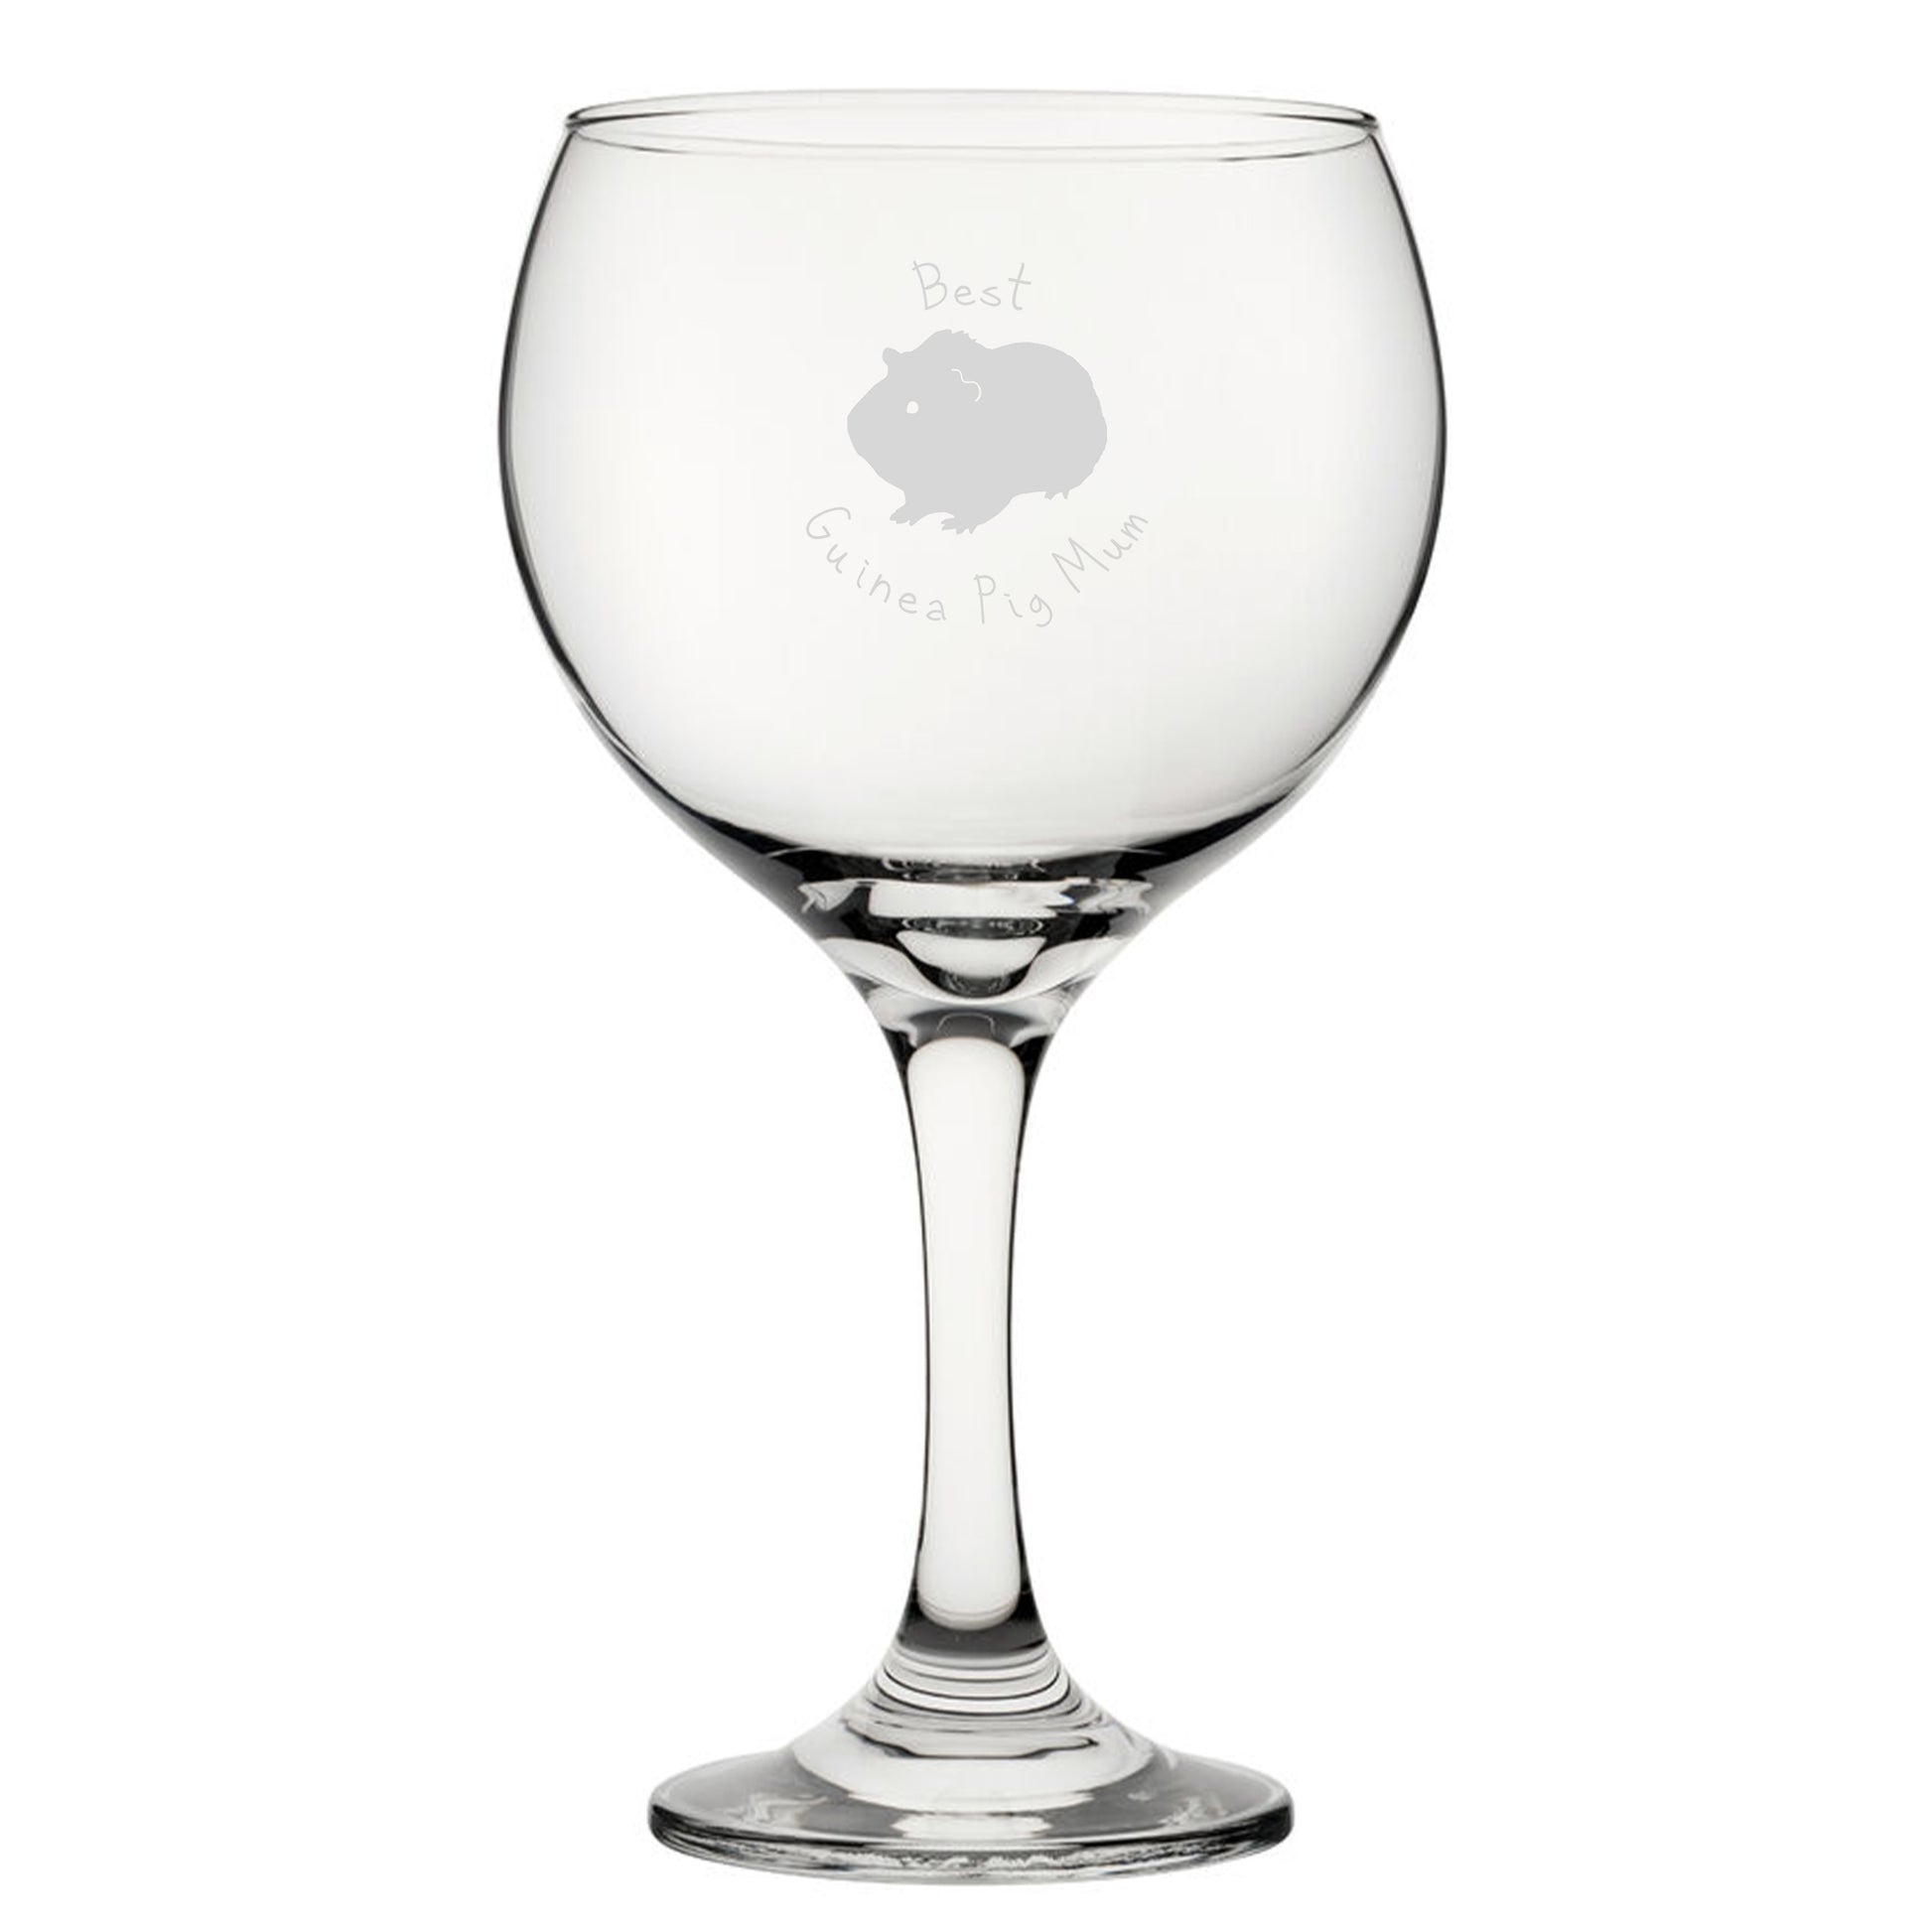 Best Guinea Pig Dad - Engraved Novelty Gin Balloon Cocktail Glass Image 2